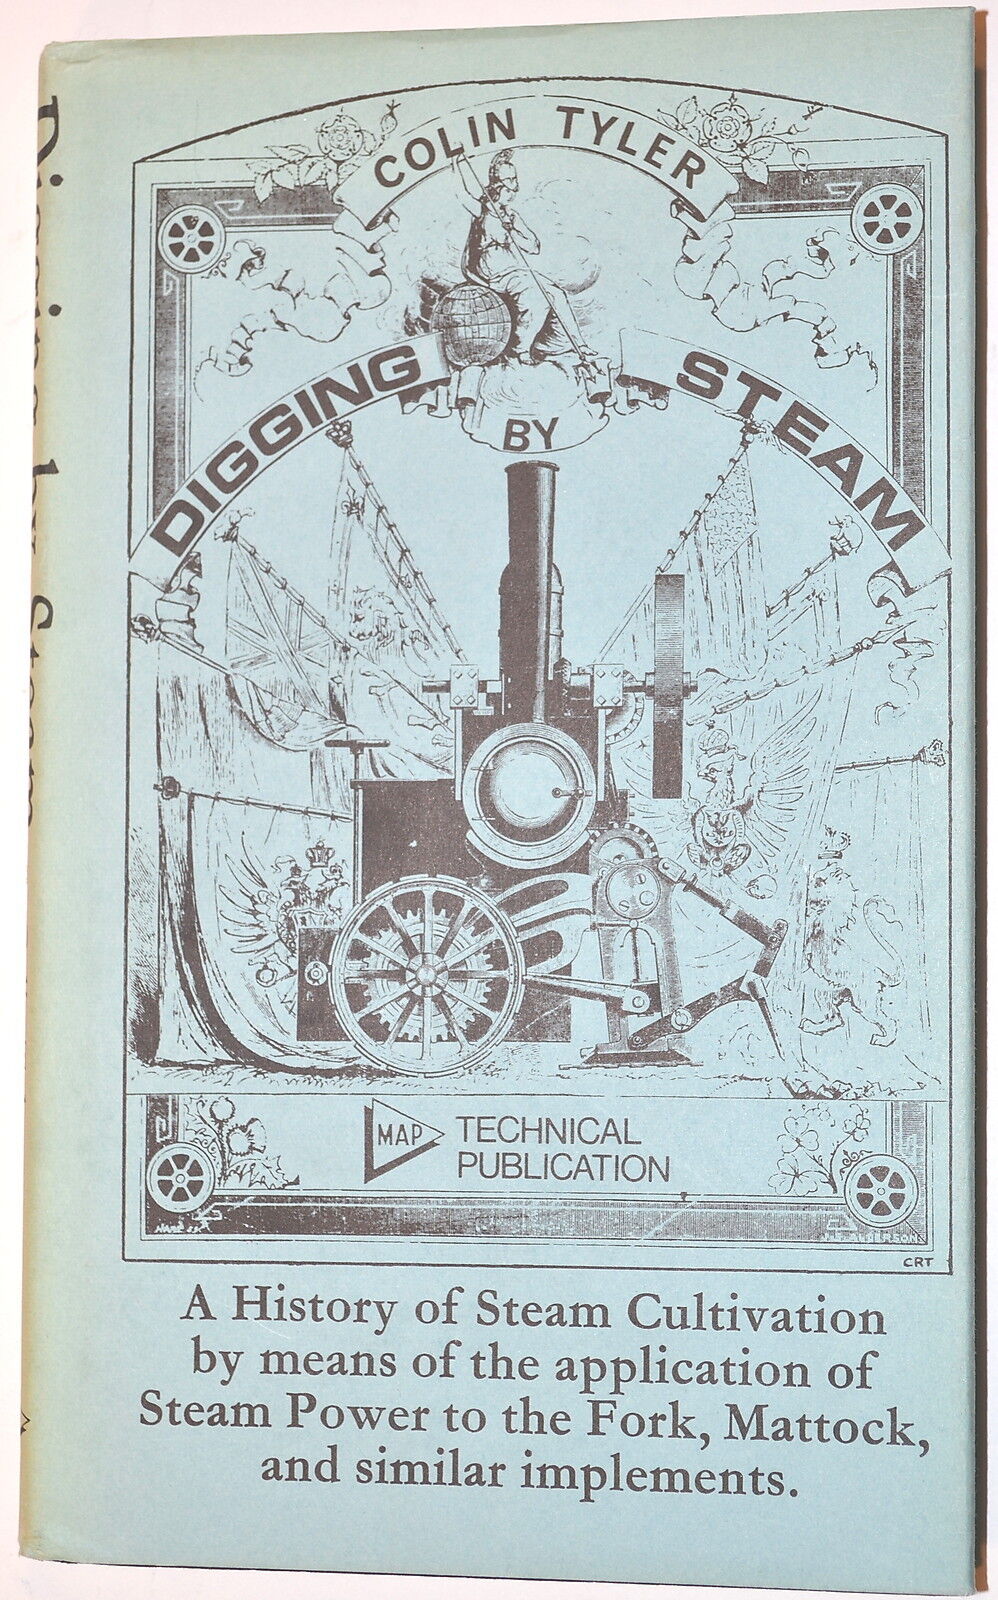 DIGGING BY STEAM A HISTORY by Tyler 1977 #RB234 model live steam myford lathe